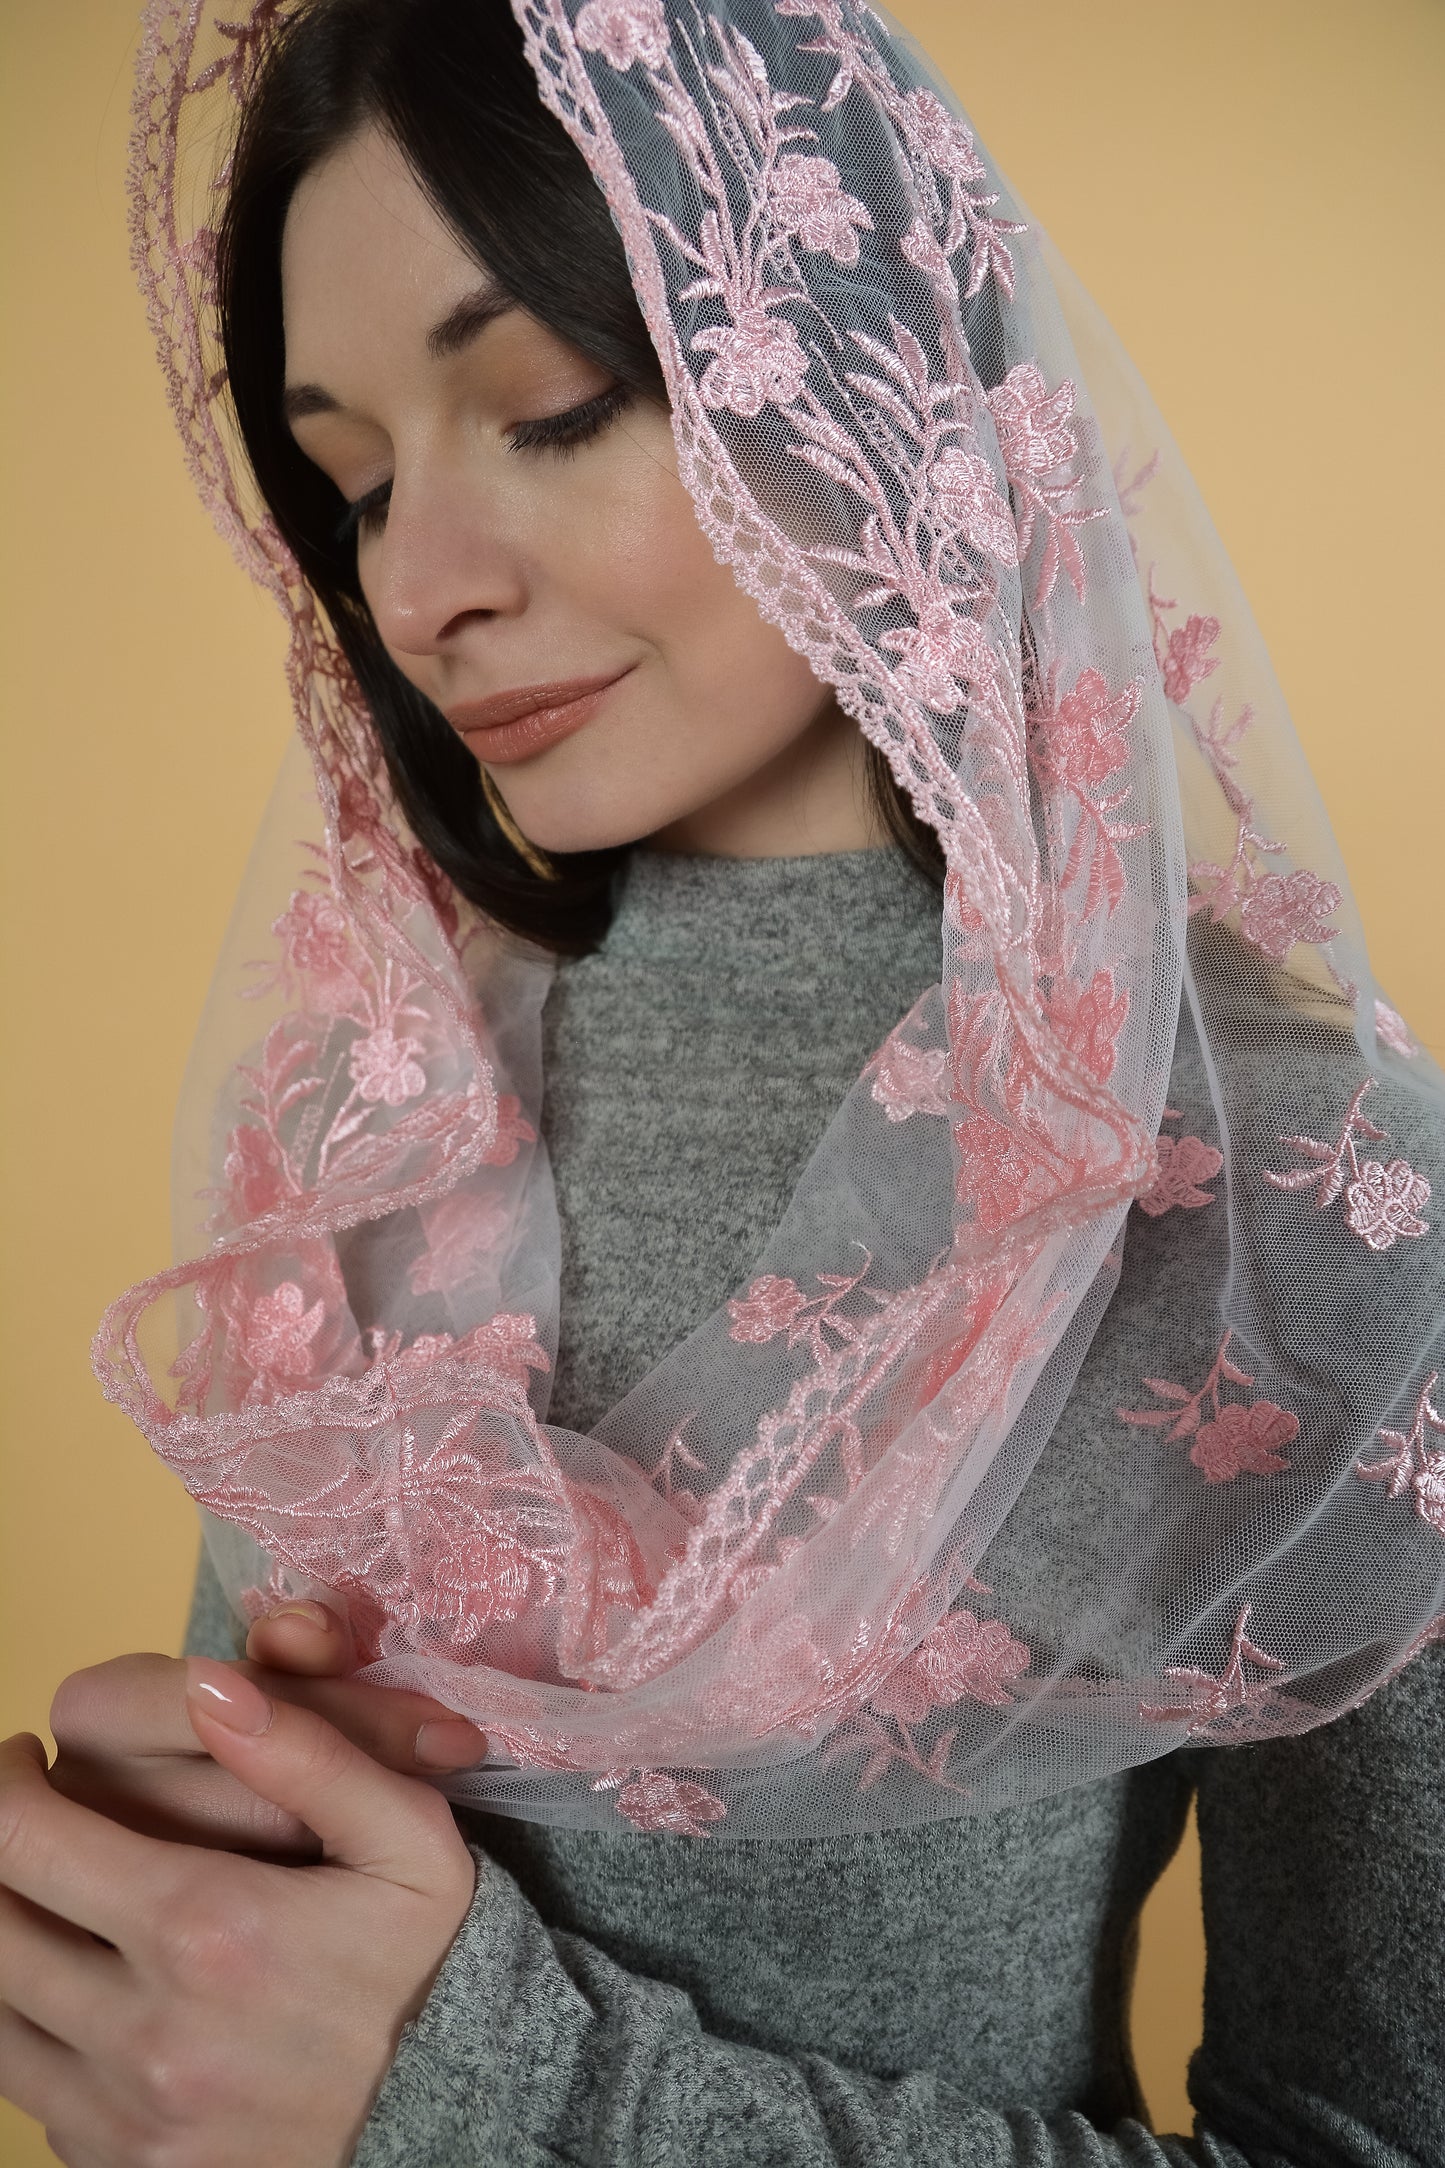 PINK INFINITY VEIL WITH FLOWERS - MariaVeils